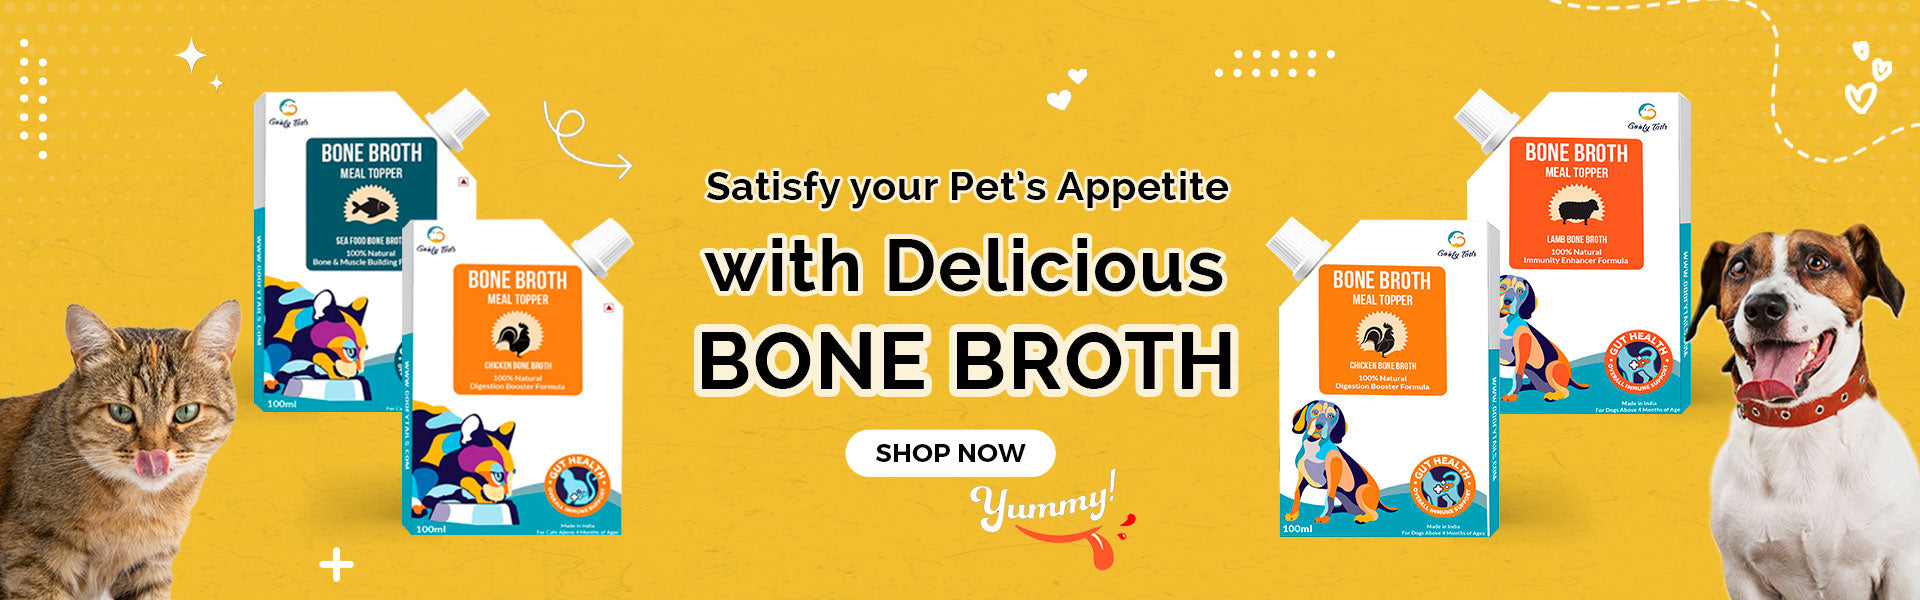 bone broth for dogs and cats from goofytails.com